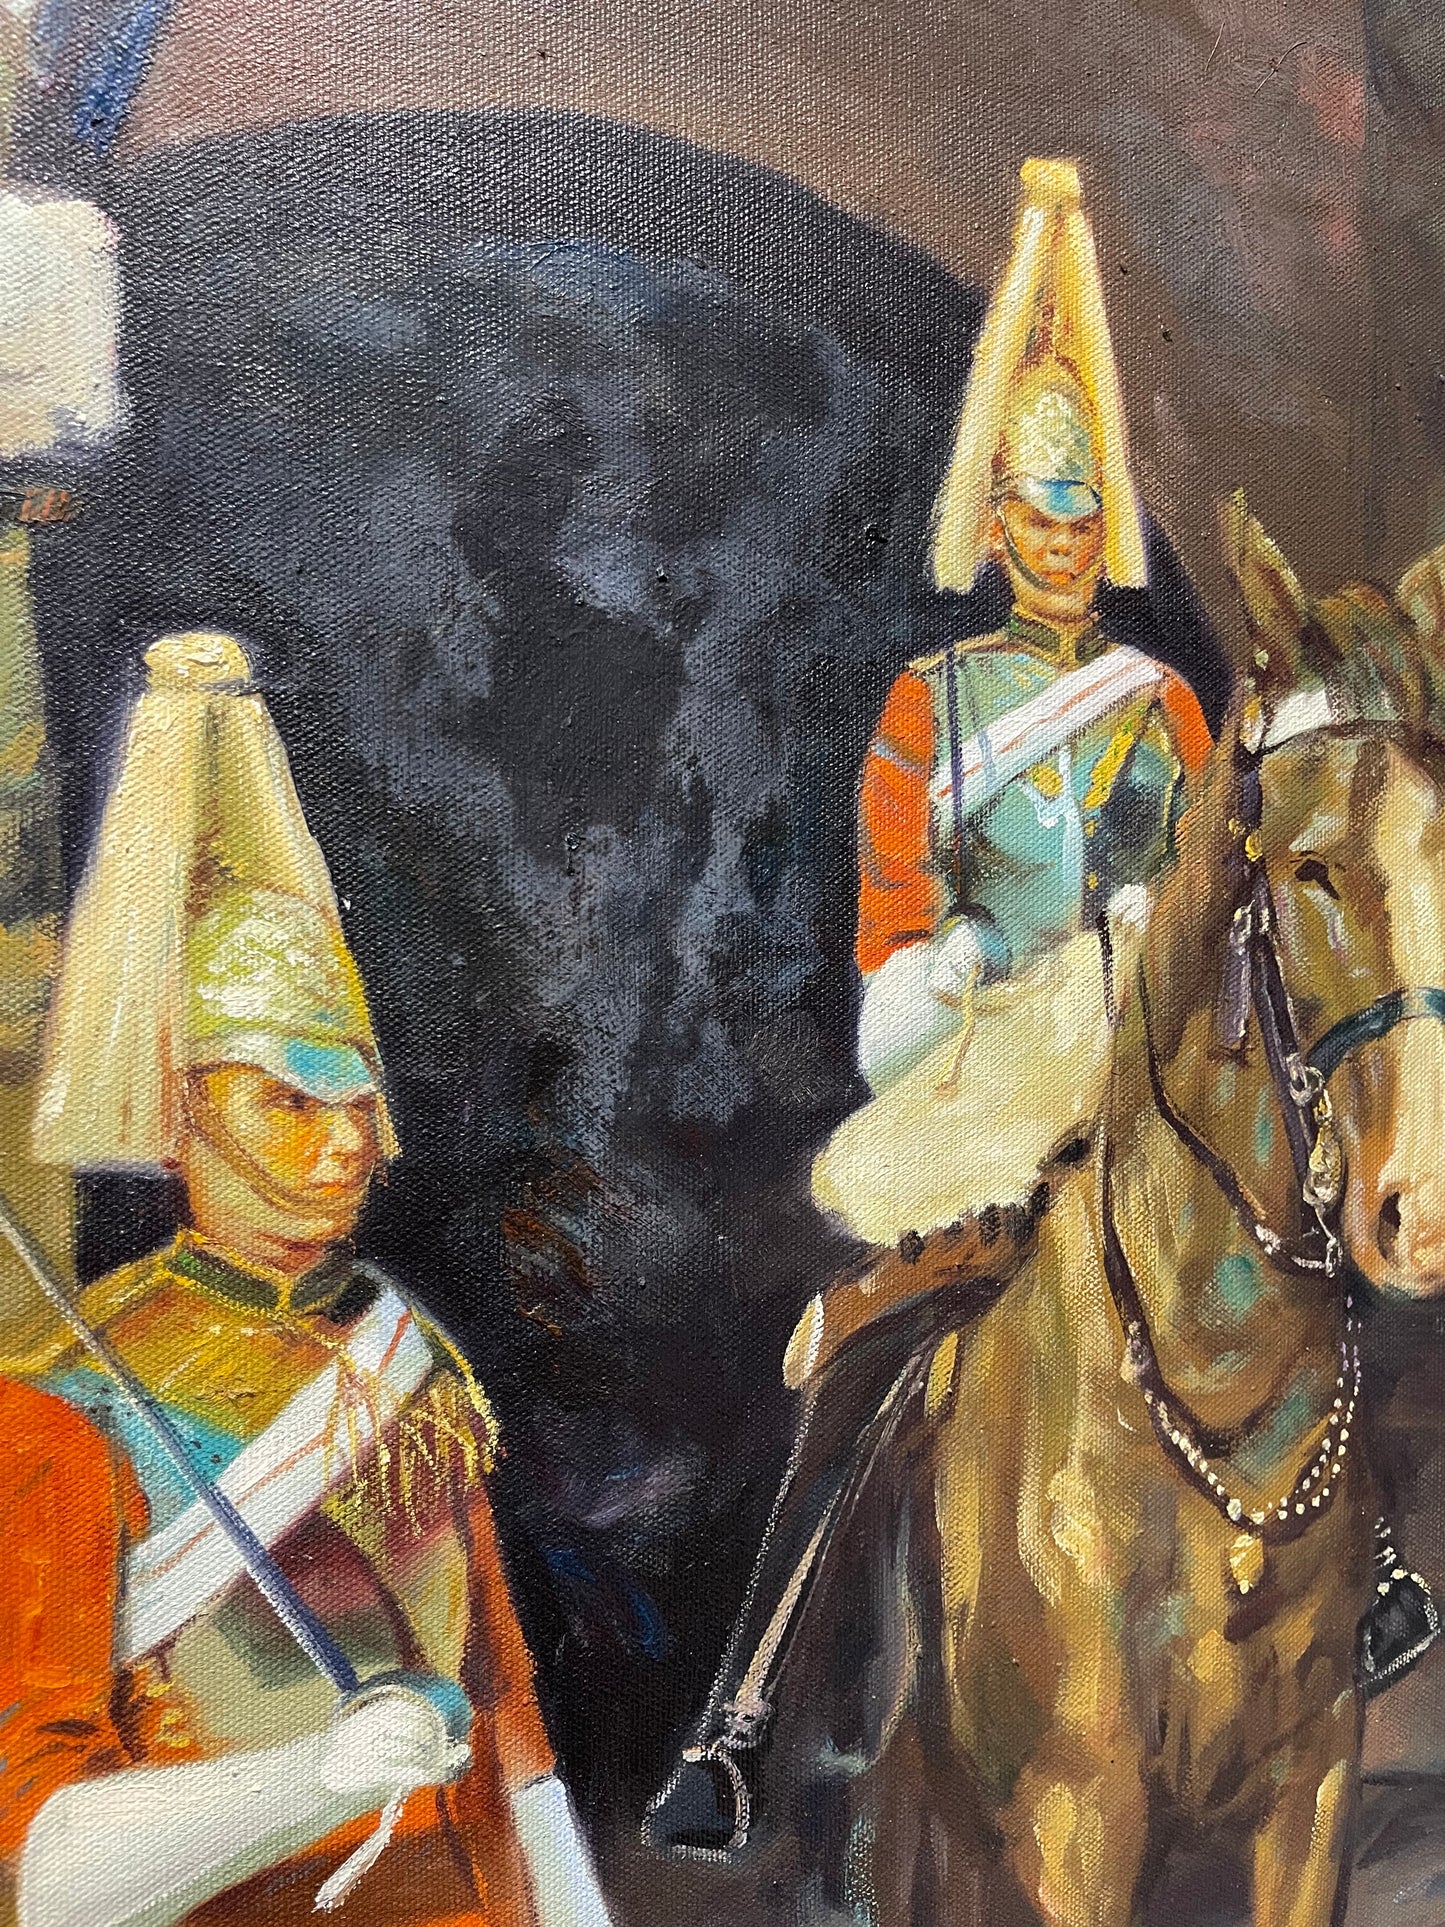 C1970s Oil Painting  - Horse Guards, St James Palace London